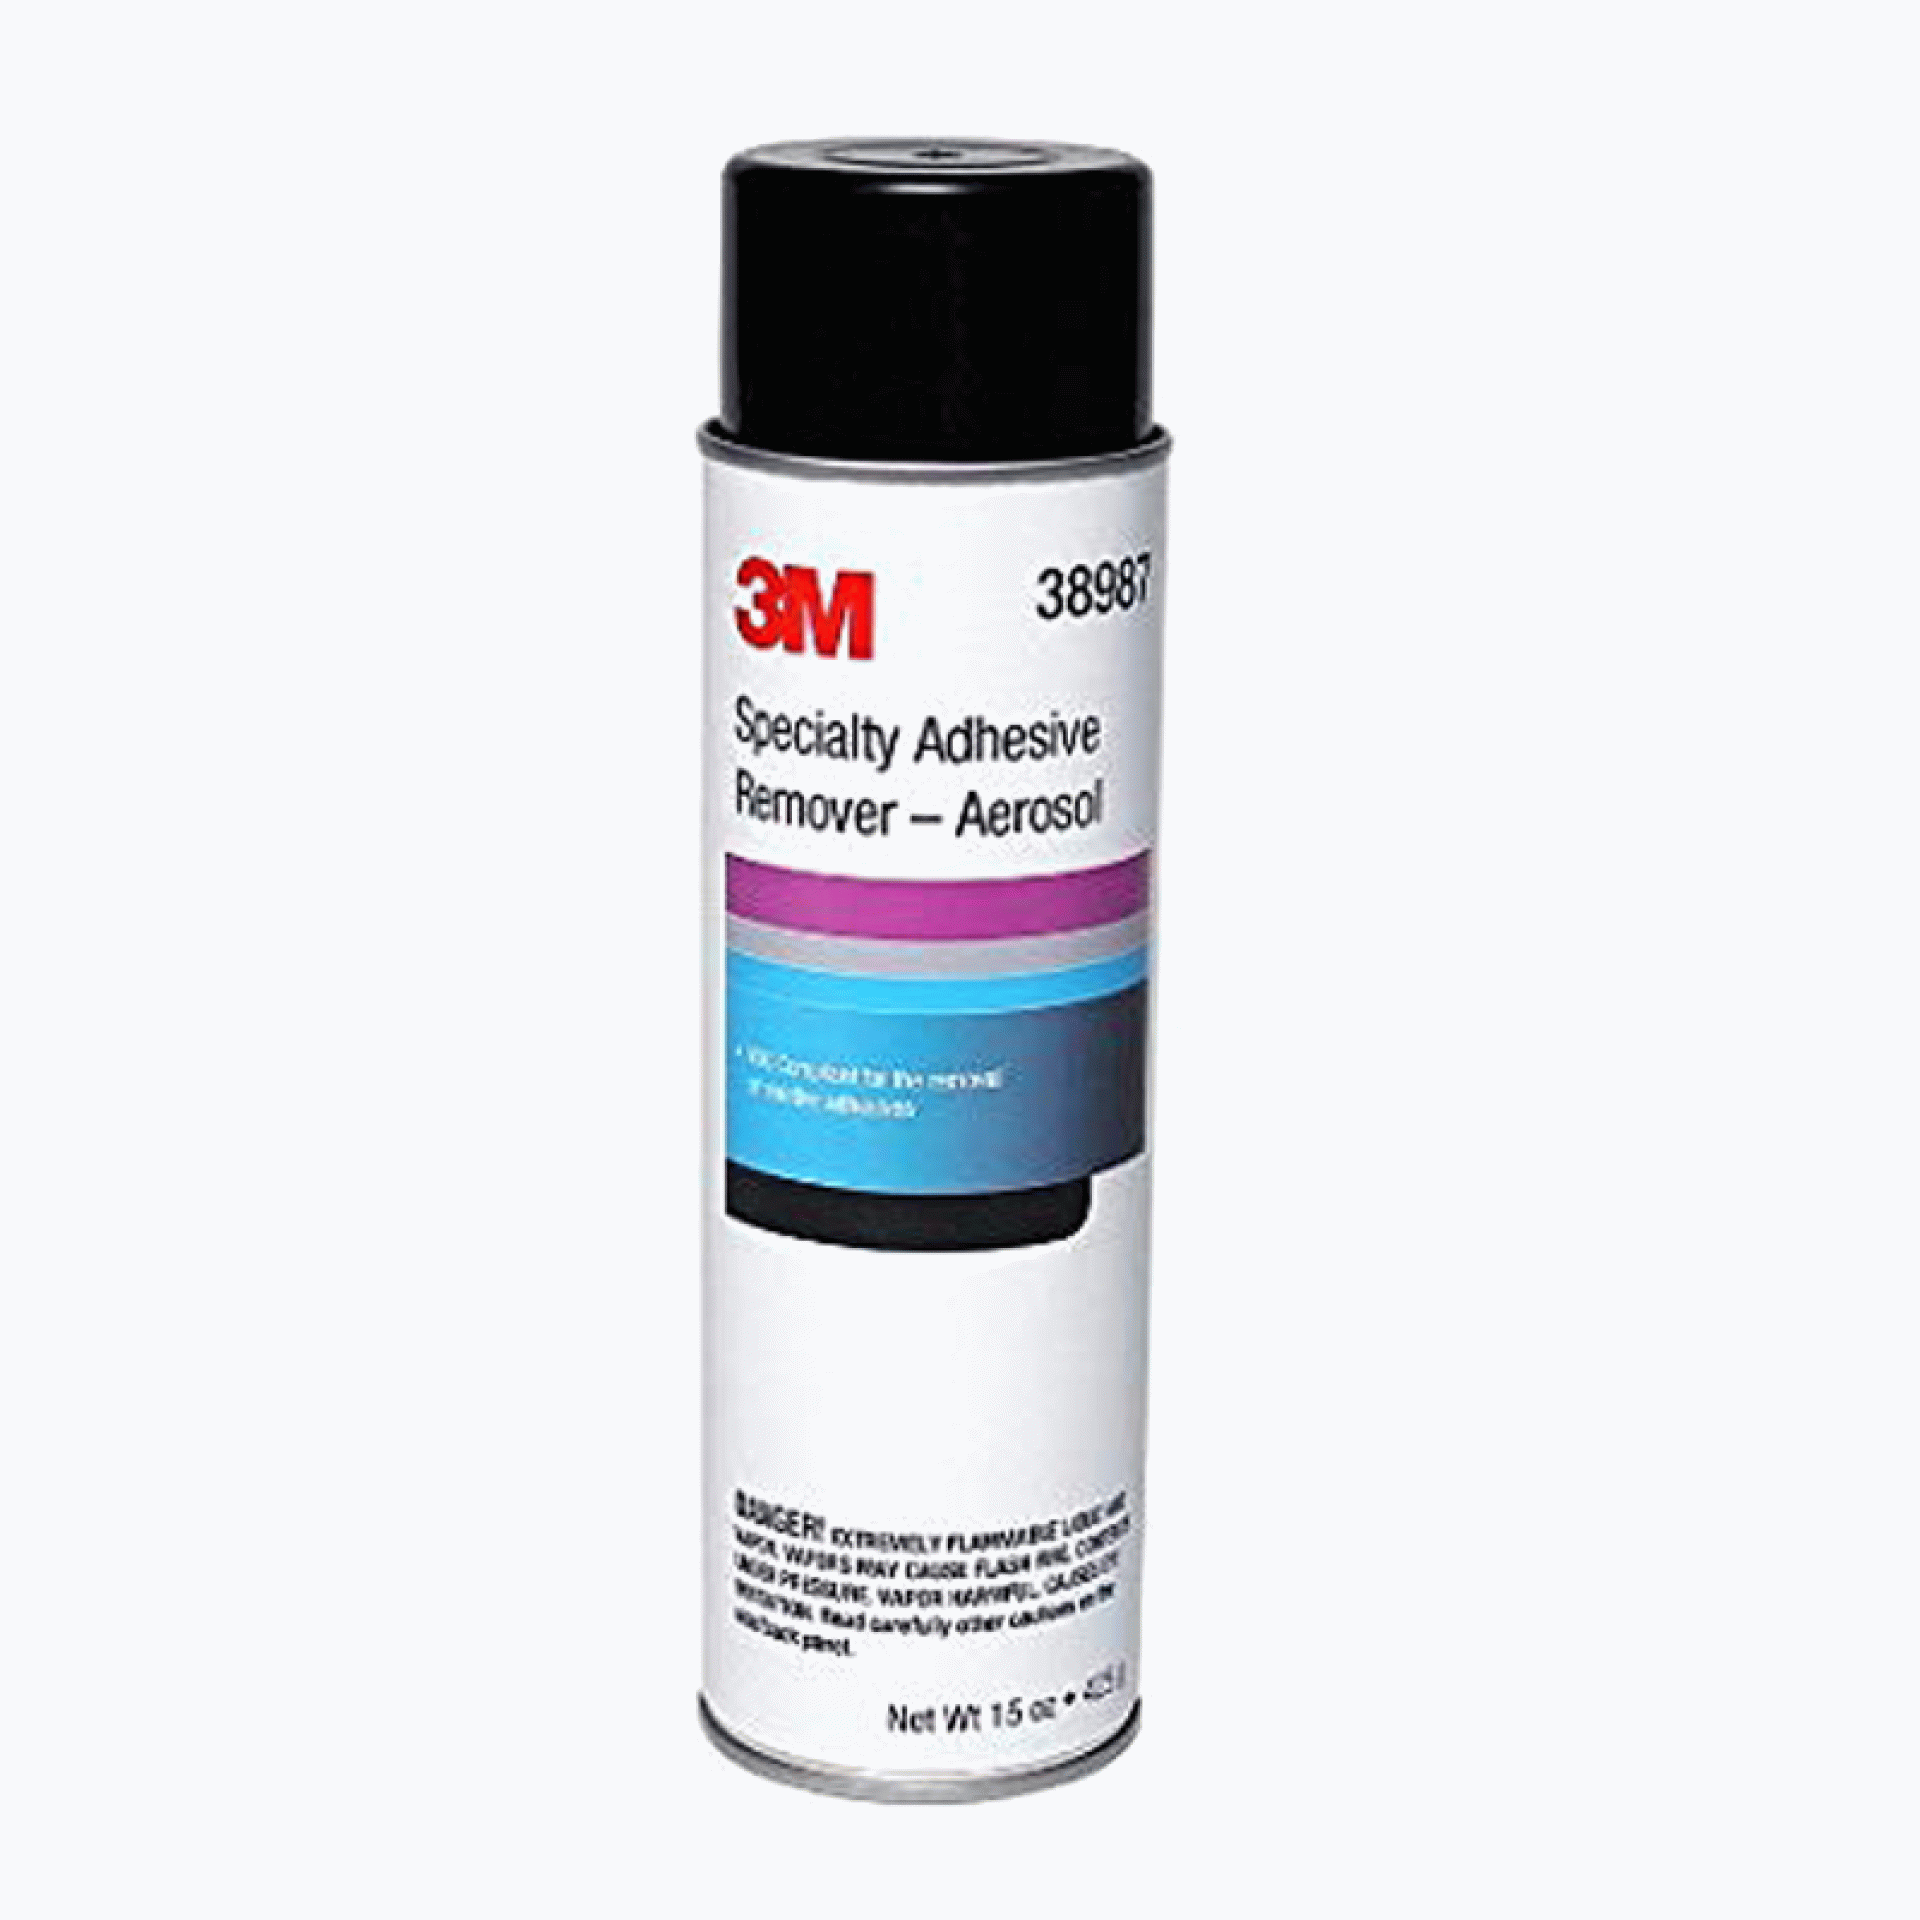 3M Company | 38987 | SPECIALITY ADHESIVE REMOVER 15 OUNCE